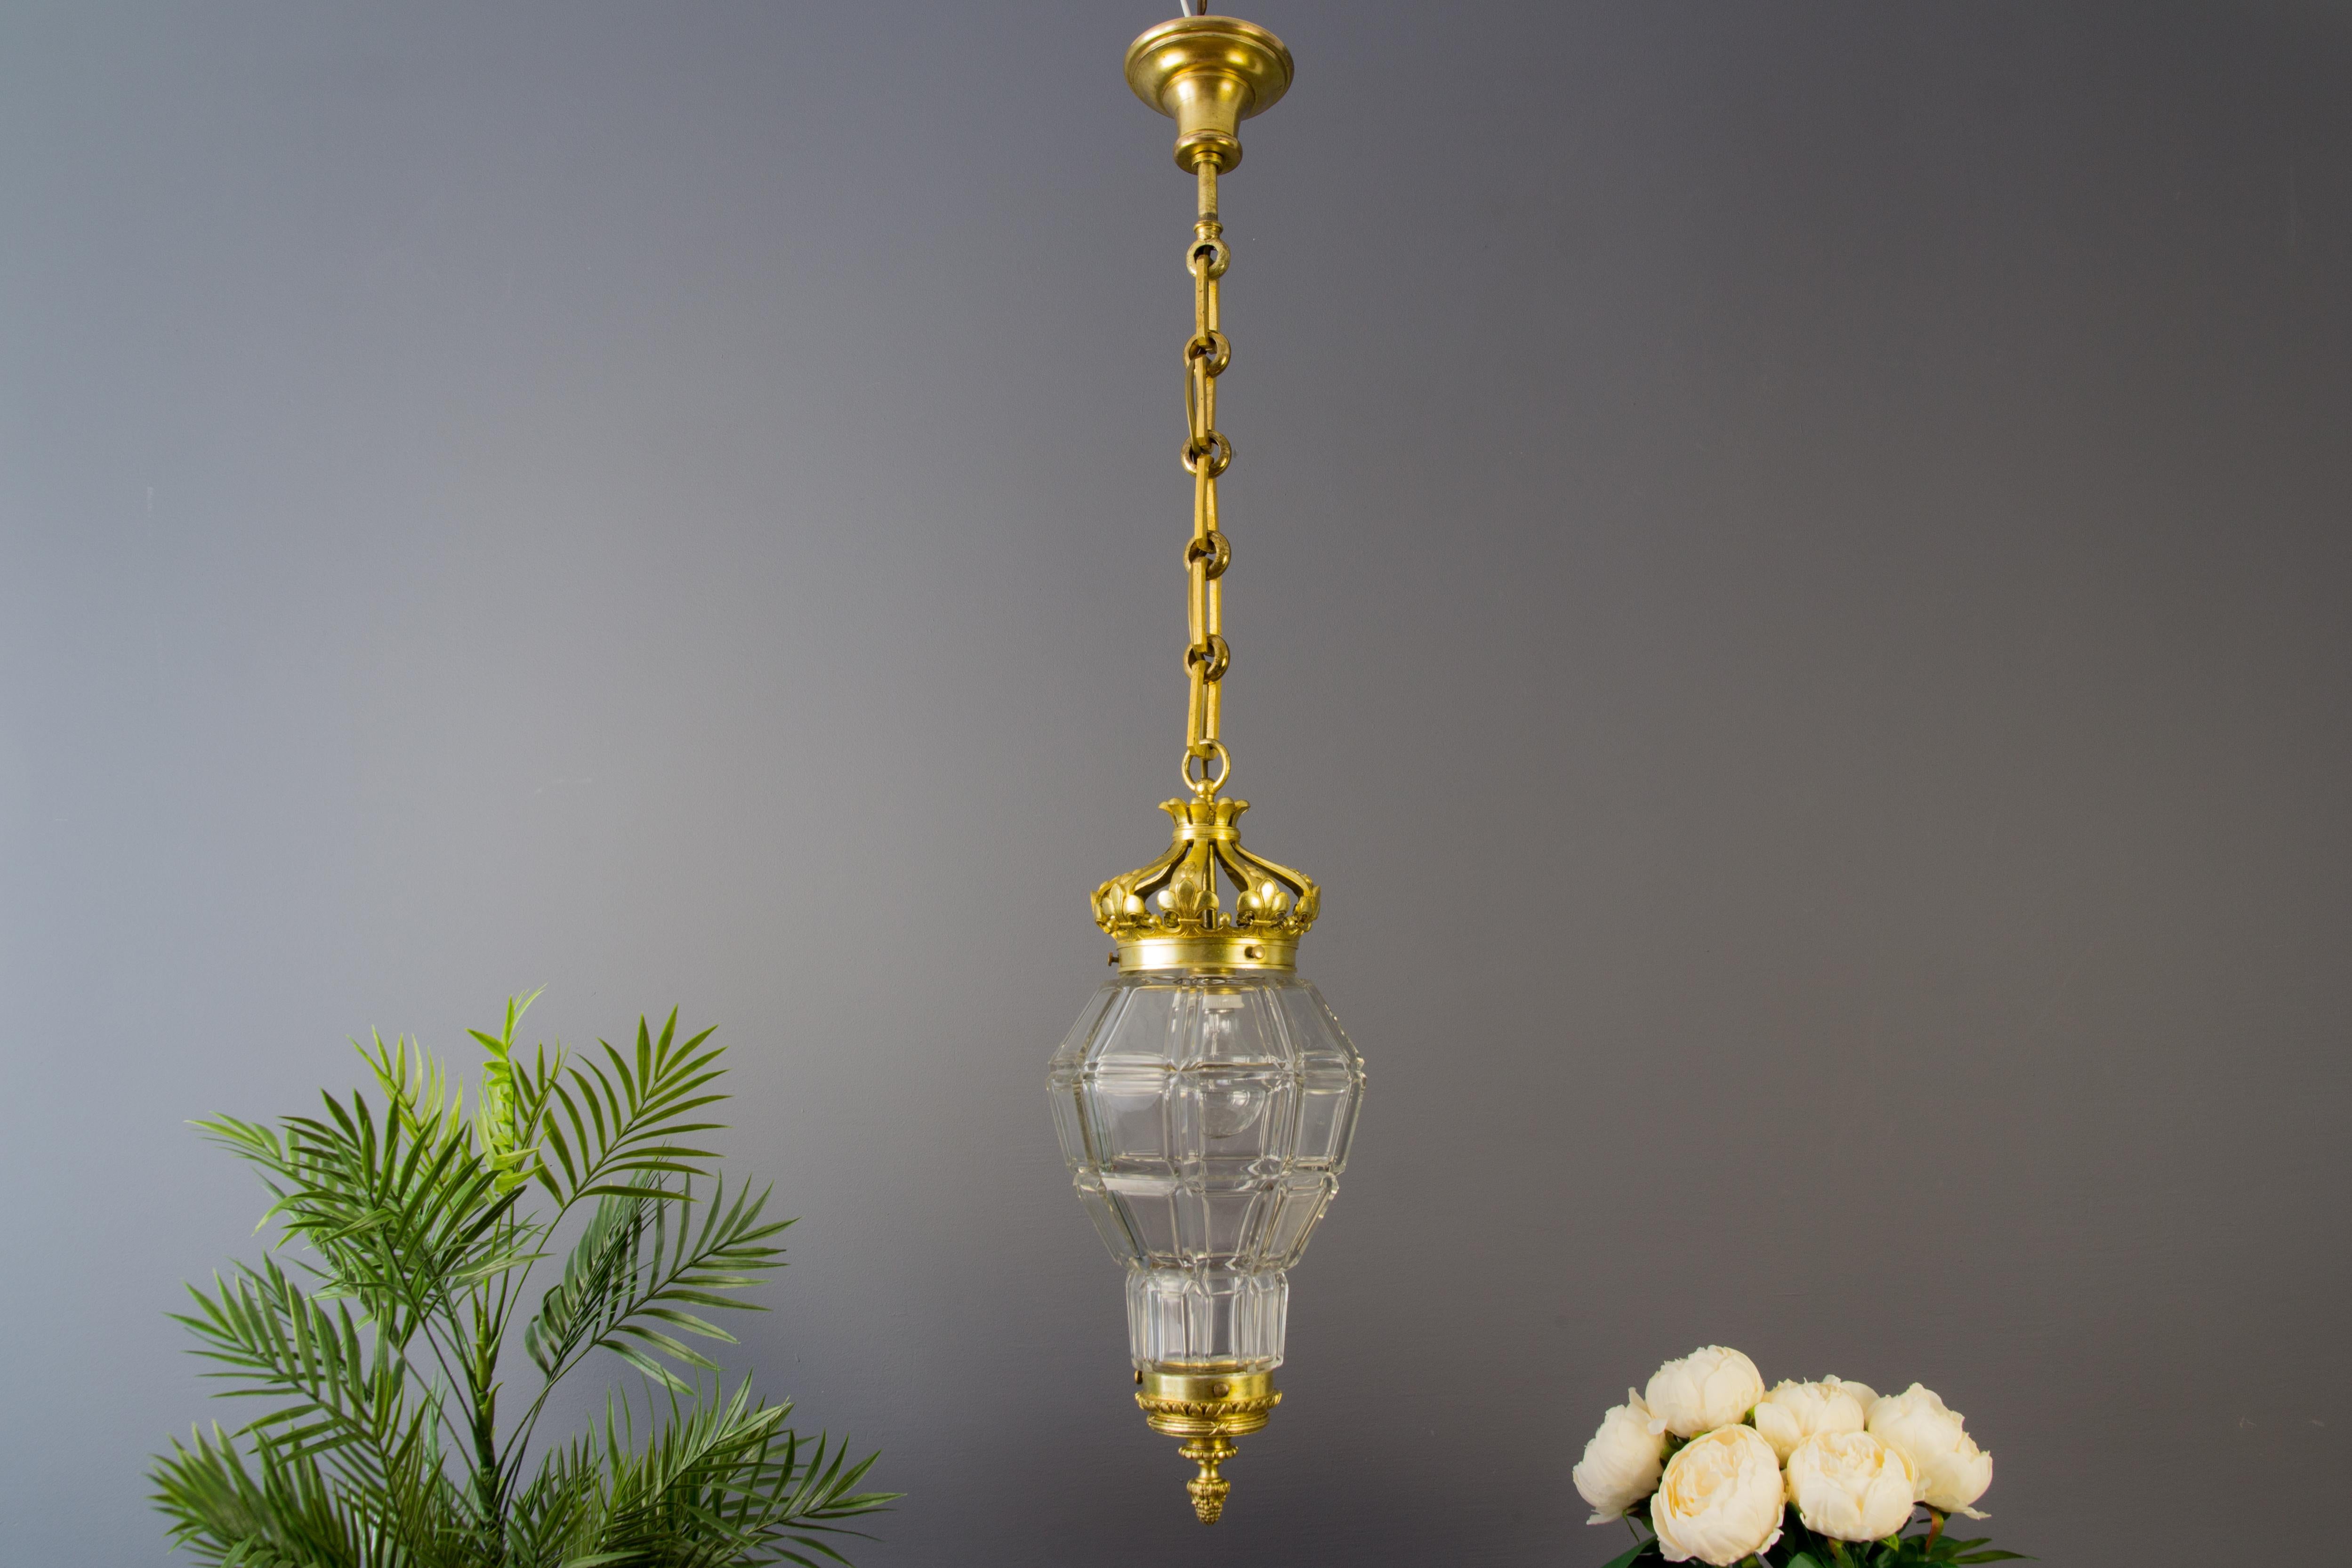 Beautiful French Louis XIV “Versailles” style bronze and clear glass hall lantern, ceiling lamp from the 1920s.
In very good condition. One socket for the E27 (E26) size light bulb.
Measures: Height is 35.43 inches / 90 cm; diameter - 8.26 inches /